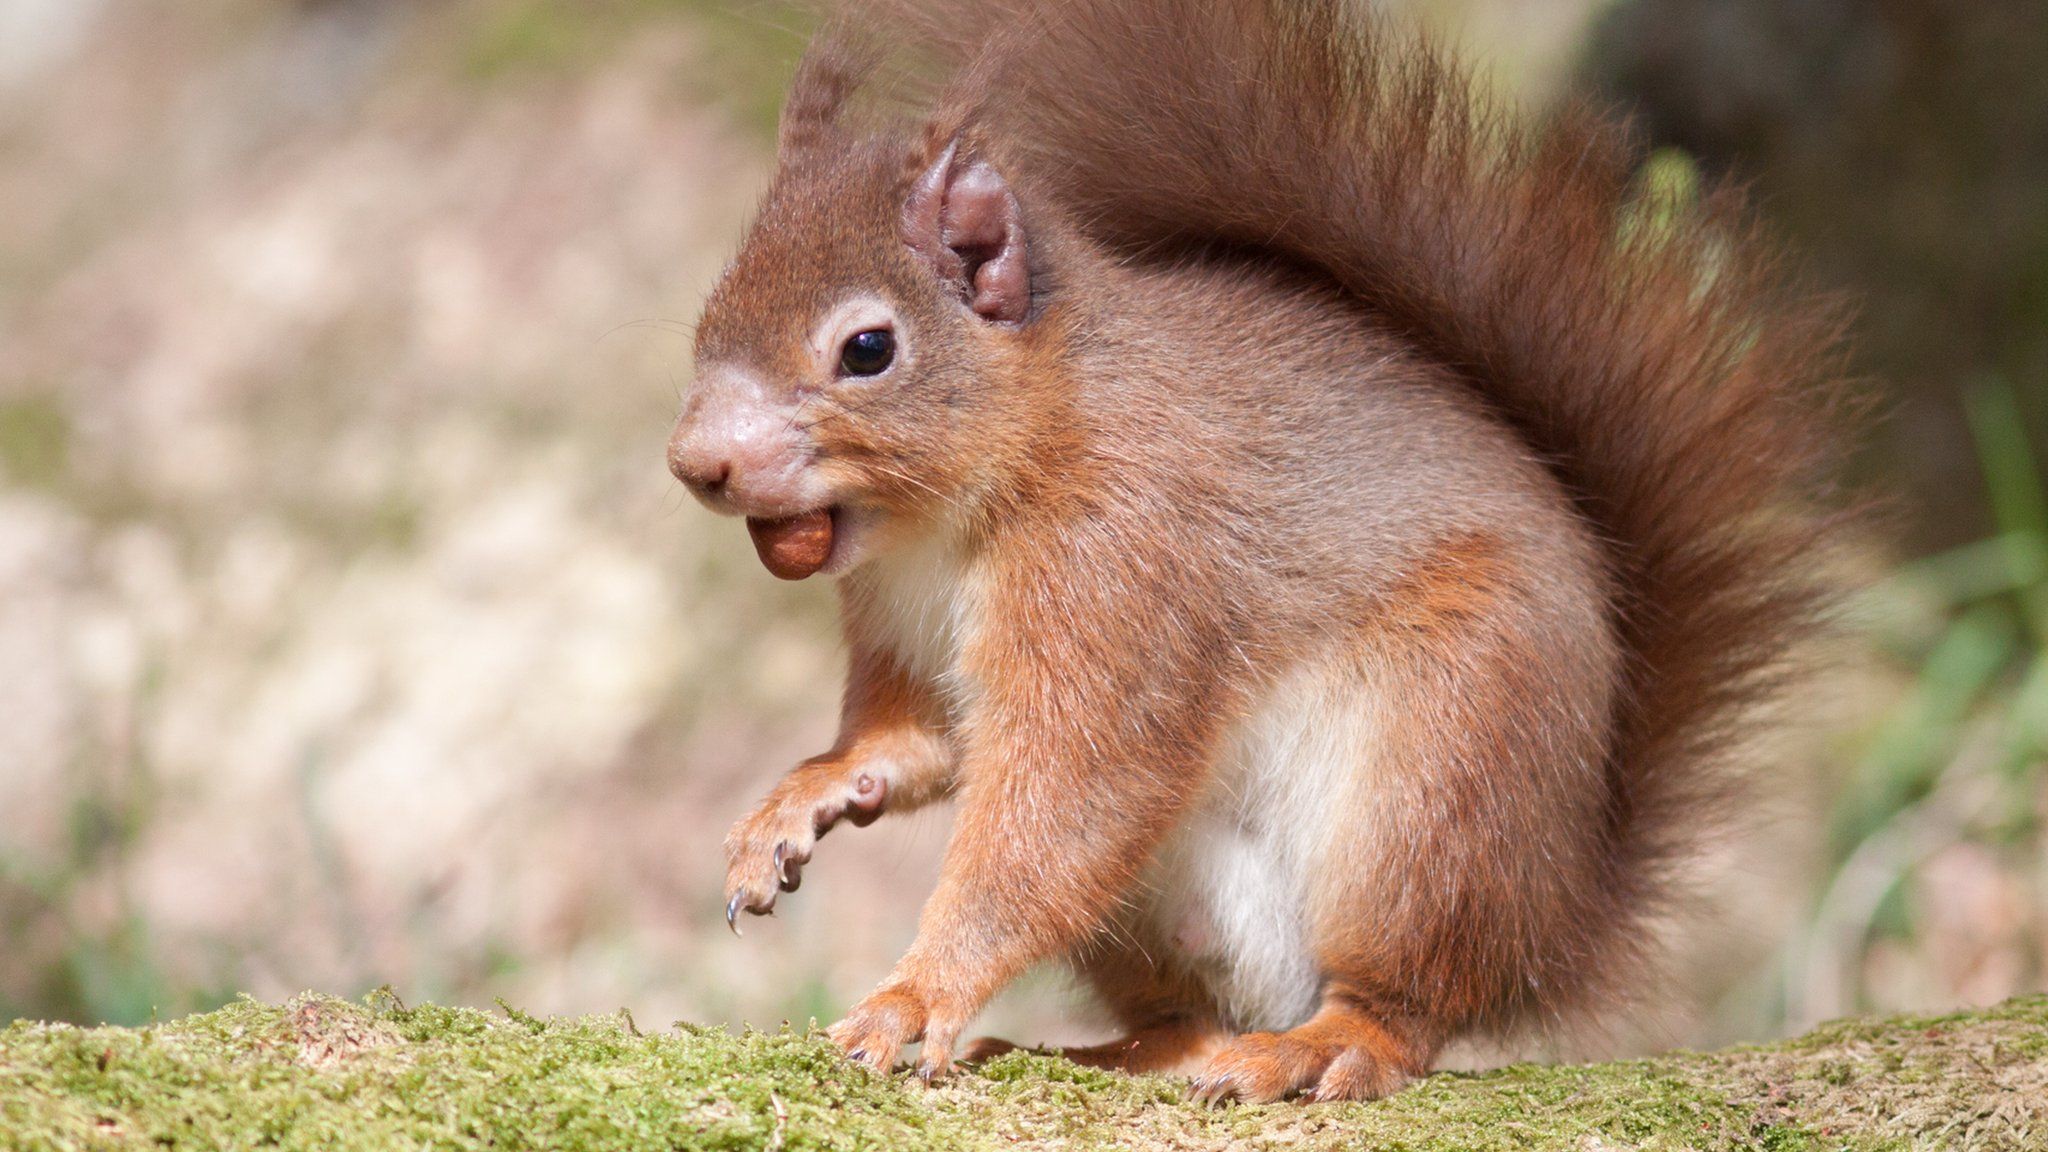 The effects of the disease can be seen on the squirrel's ear and muzzle